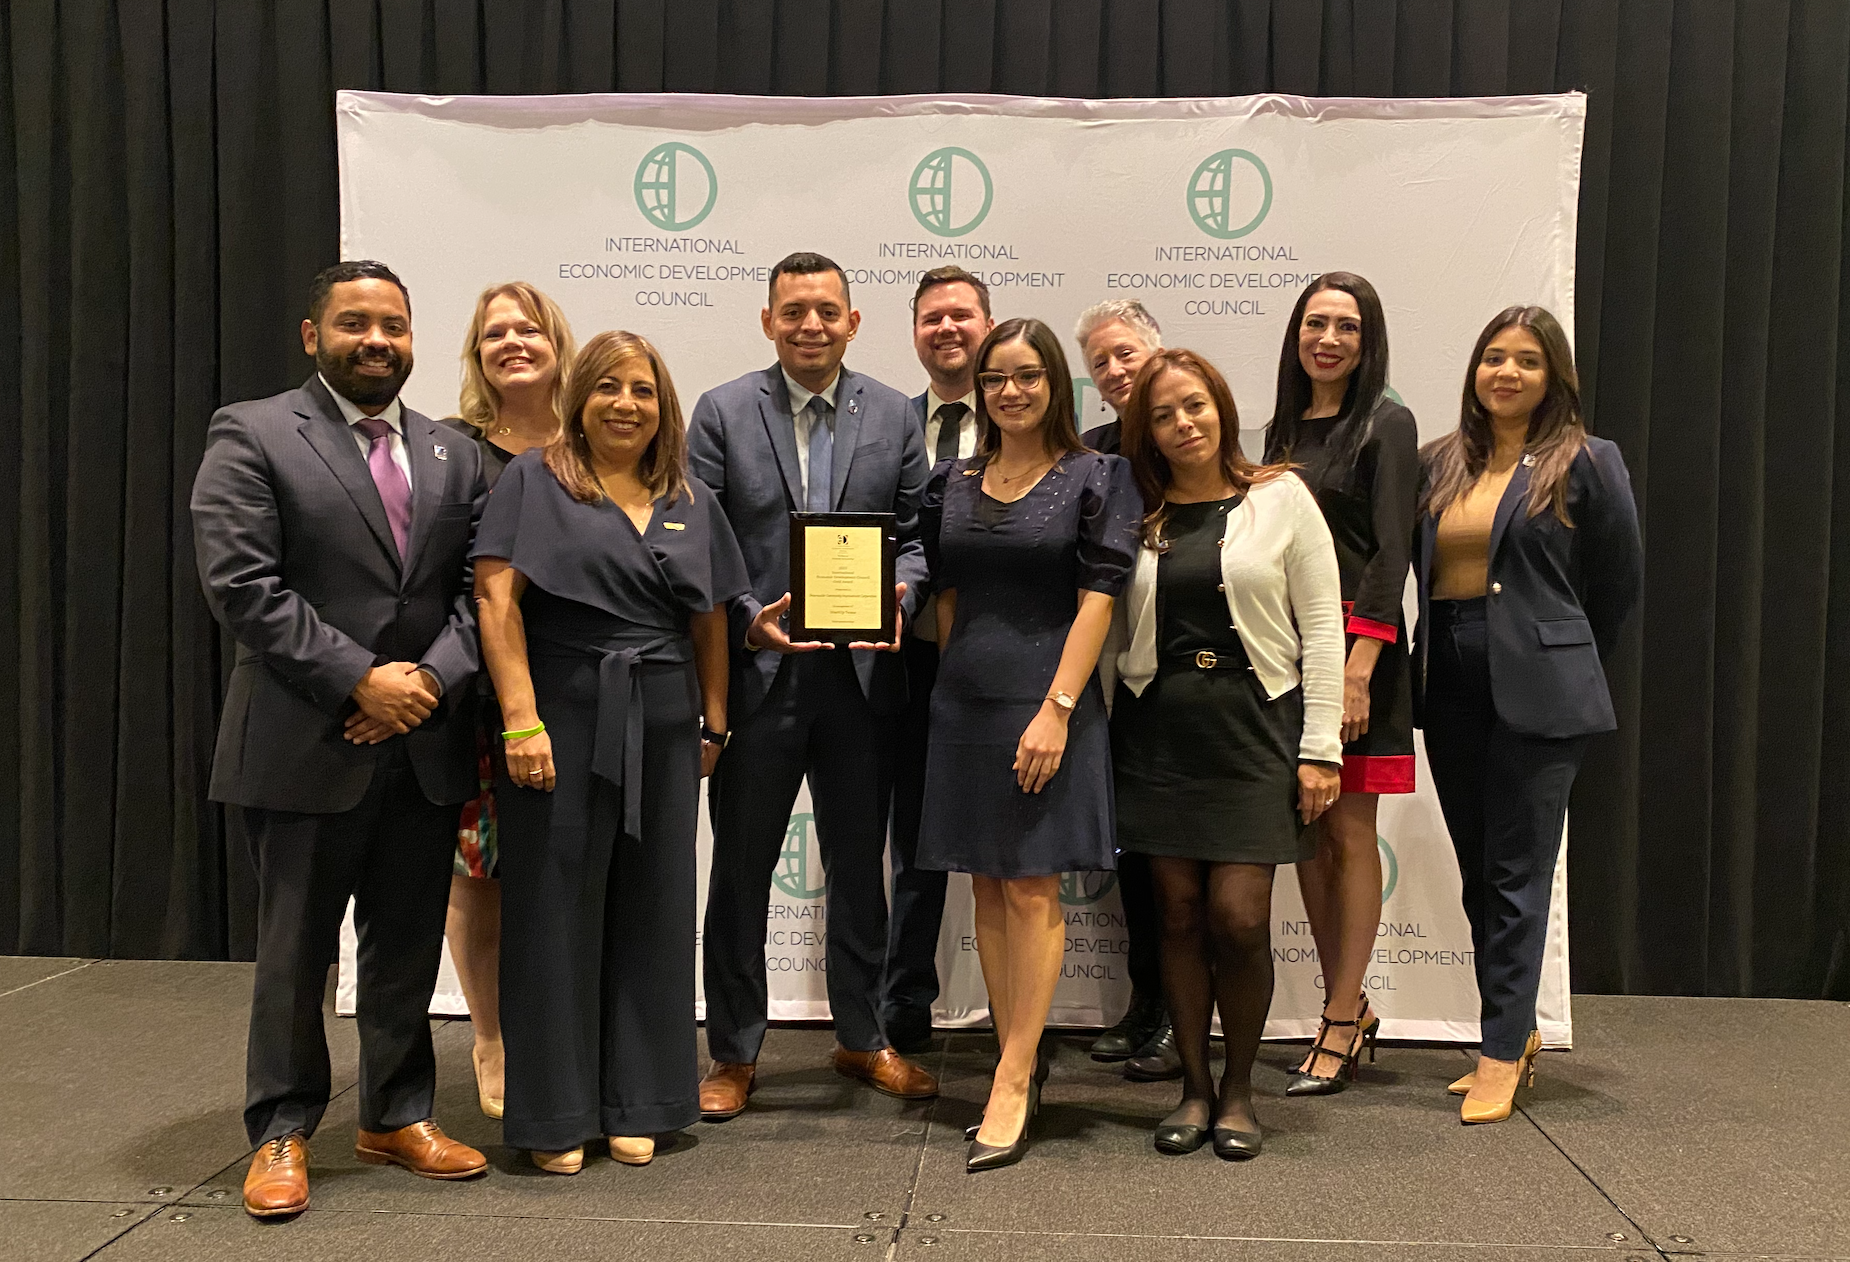 BCIC Receives Excellence in Economic Development Award from IEDC